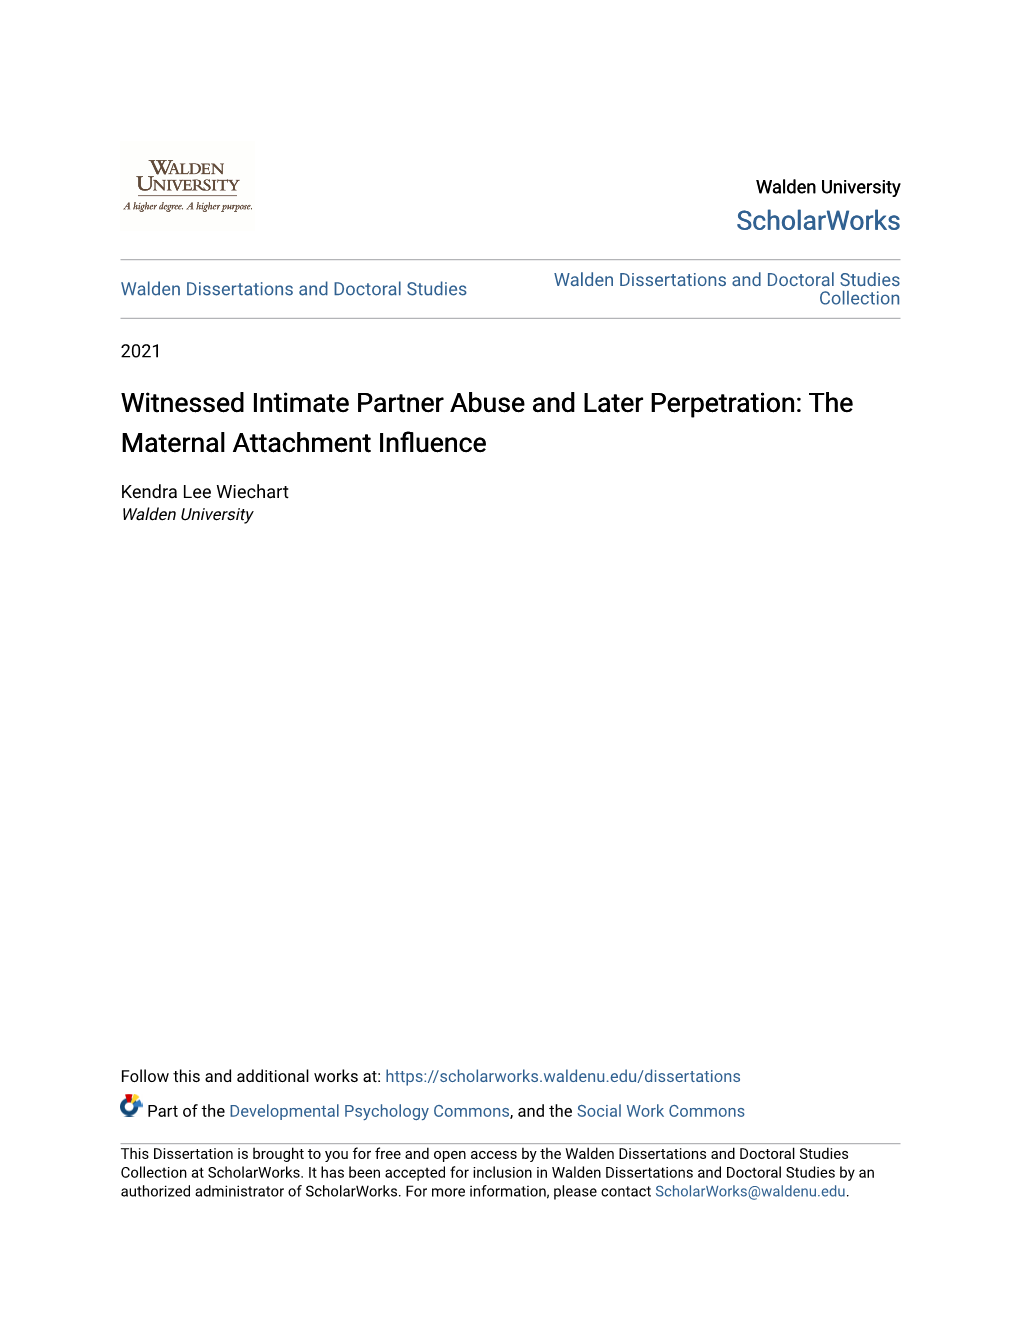 Witnessed Intimate Partner Abuse and Later Perpetration: the Maternal Attachment Influence